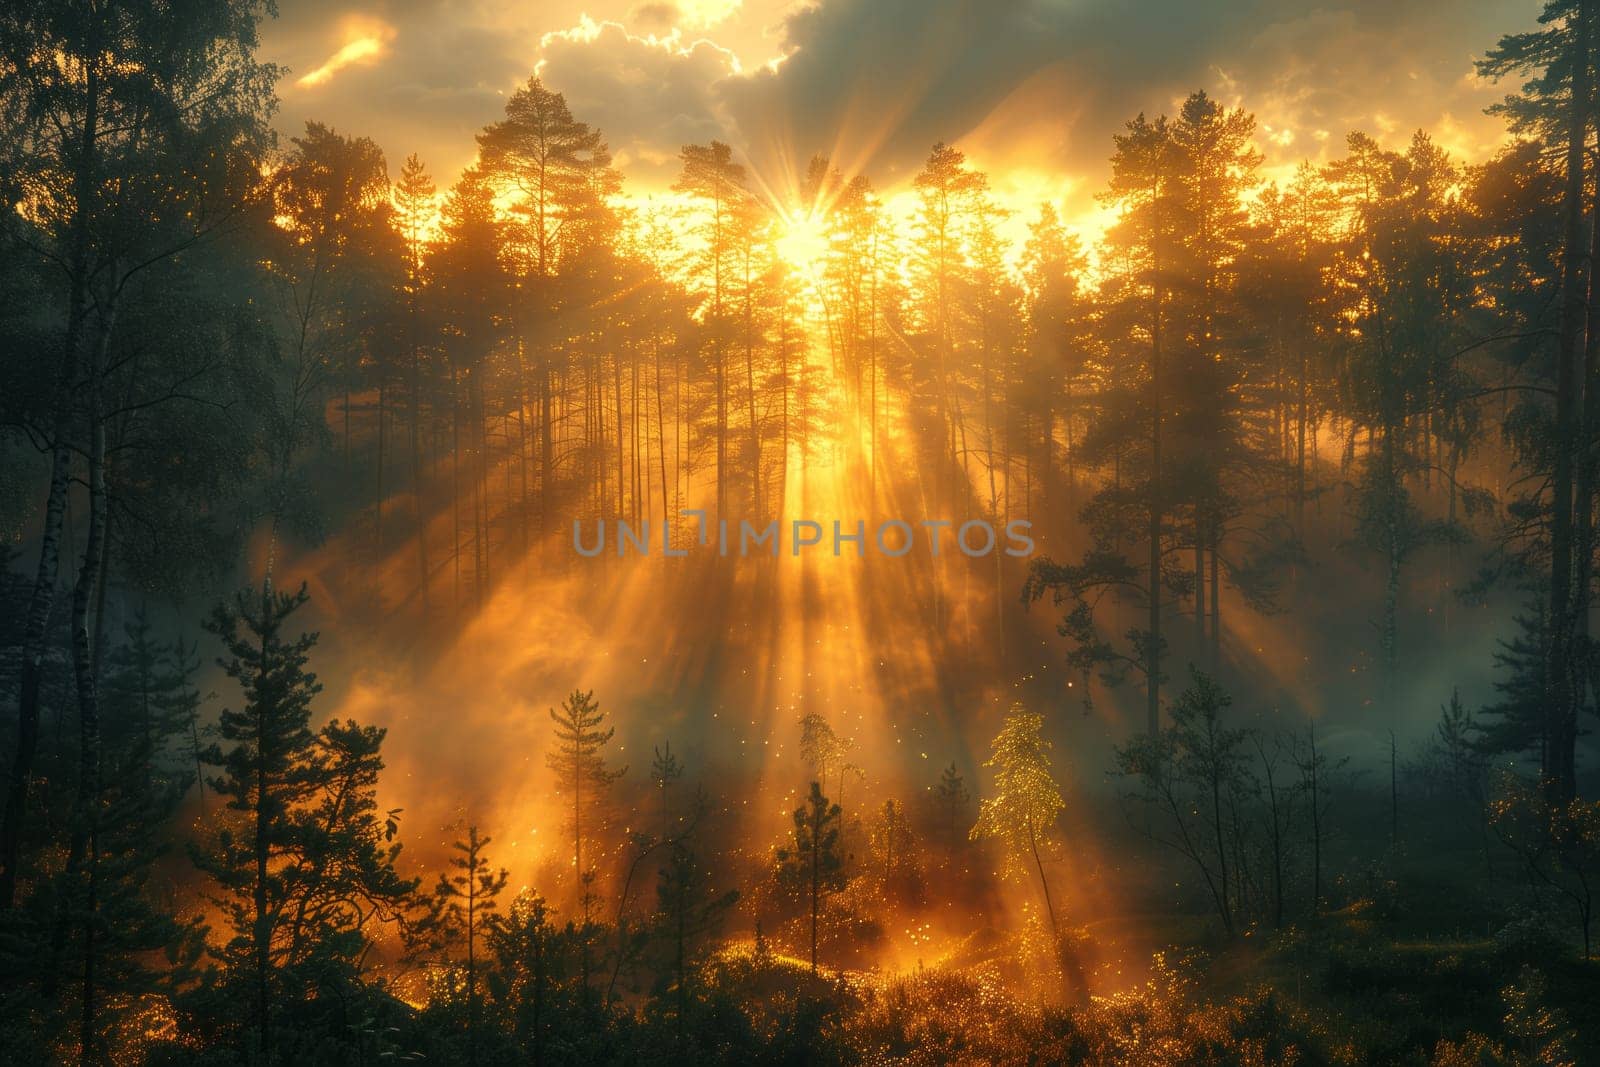 Sunlight filters through clouds, creating a magical atmosphere in the forest by richwolf